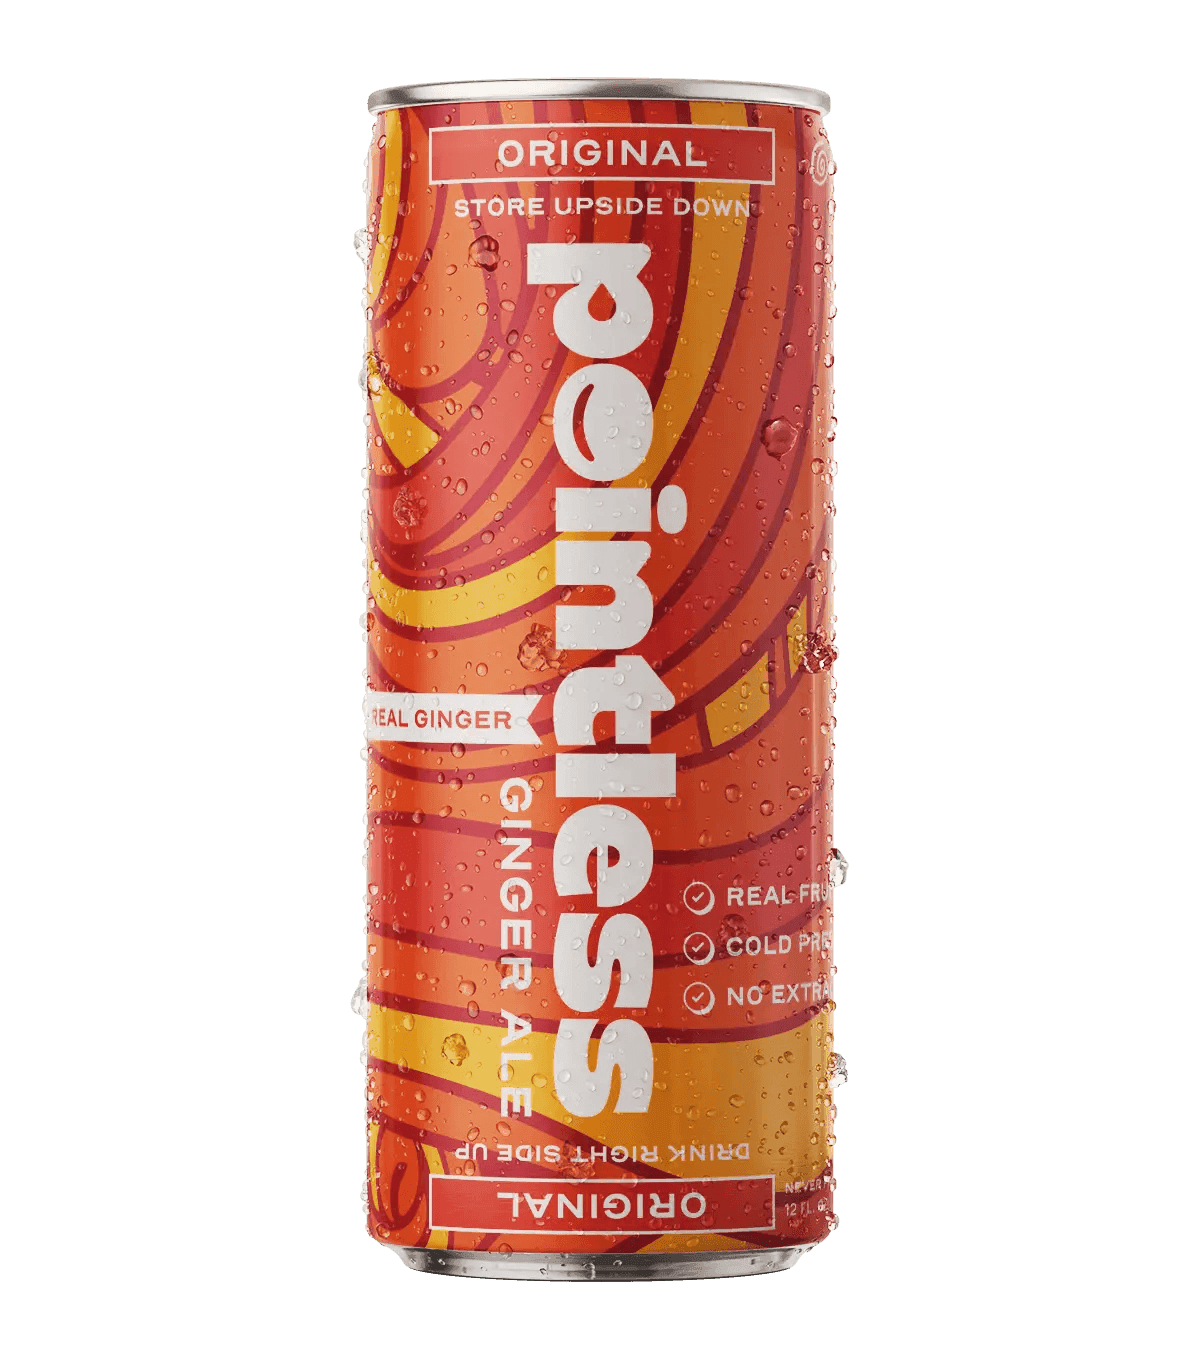 a can of ginger ale with orange and red swirls